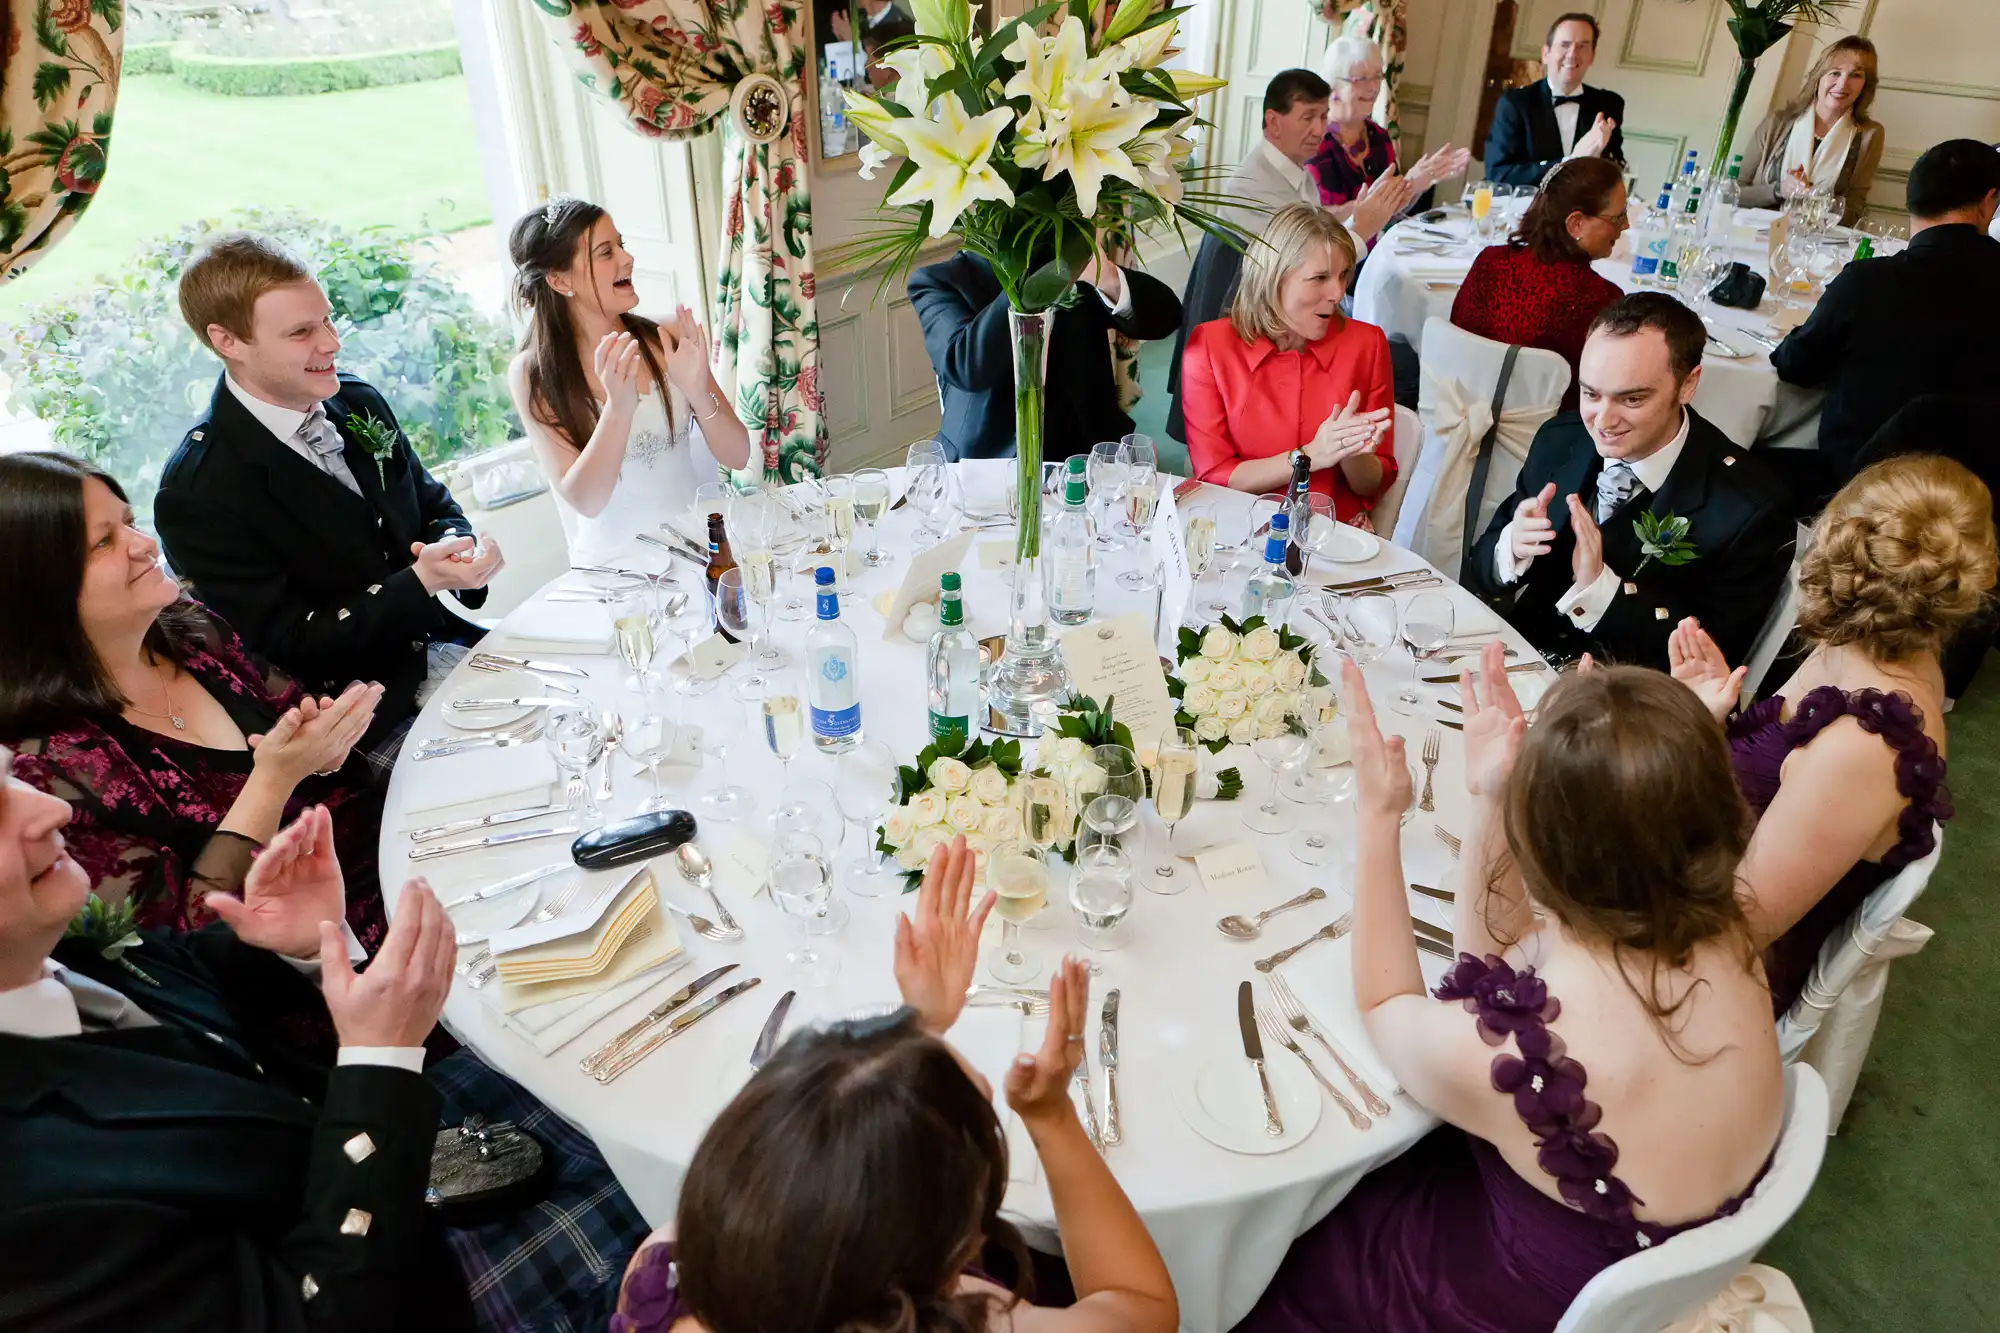 Guests at a wedding reception seated around a large table adorned with flowers, clapping and interacting joyfully.